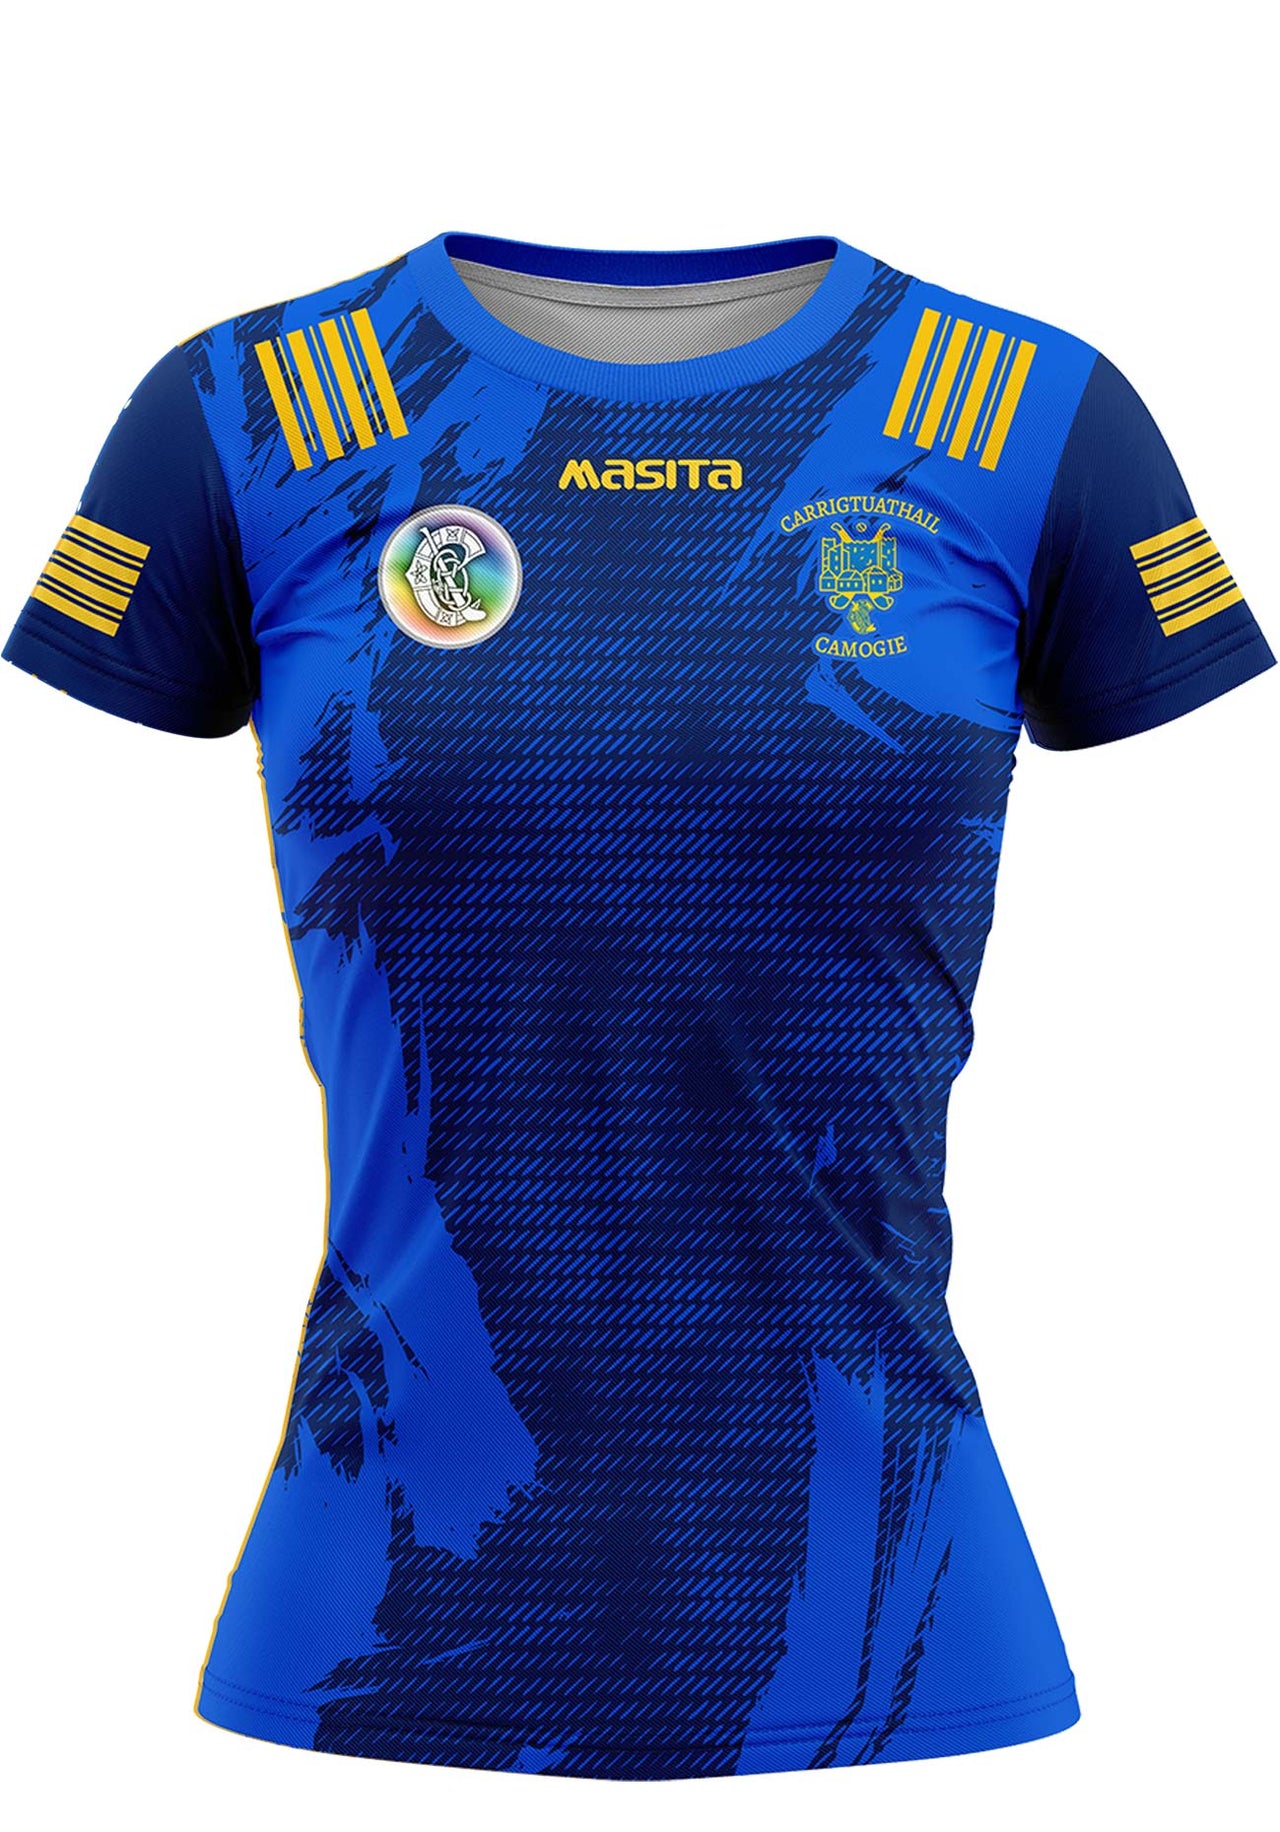 Carrigtwohill Camogie Training Jersey Regular Fit Adult